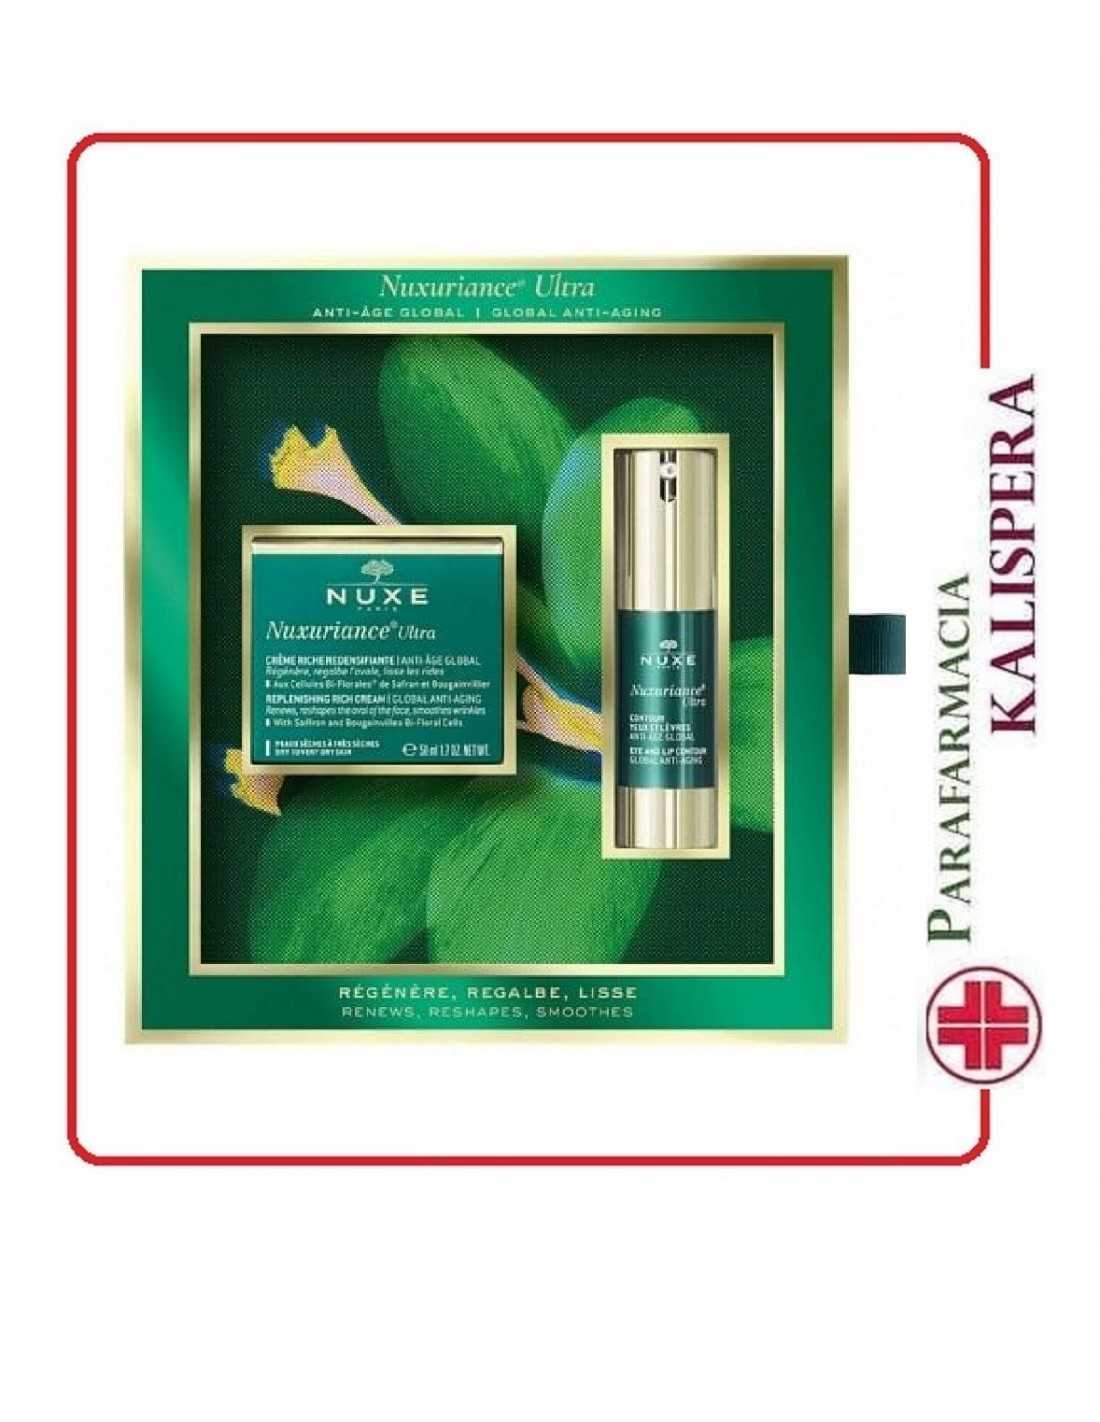 Nuxe Nuxuriance Ultra Creme Riche 50ml